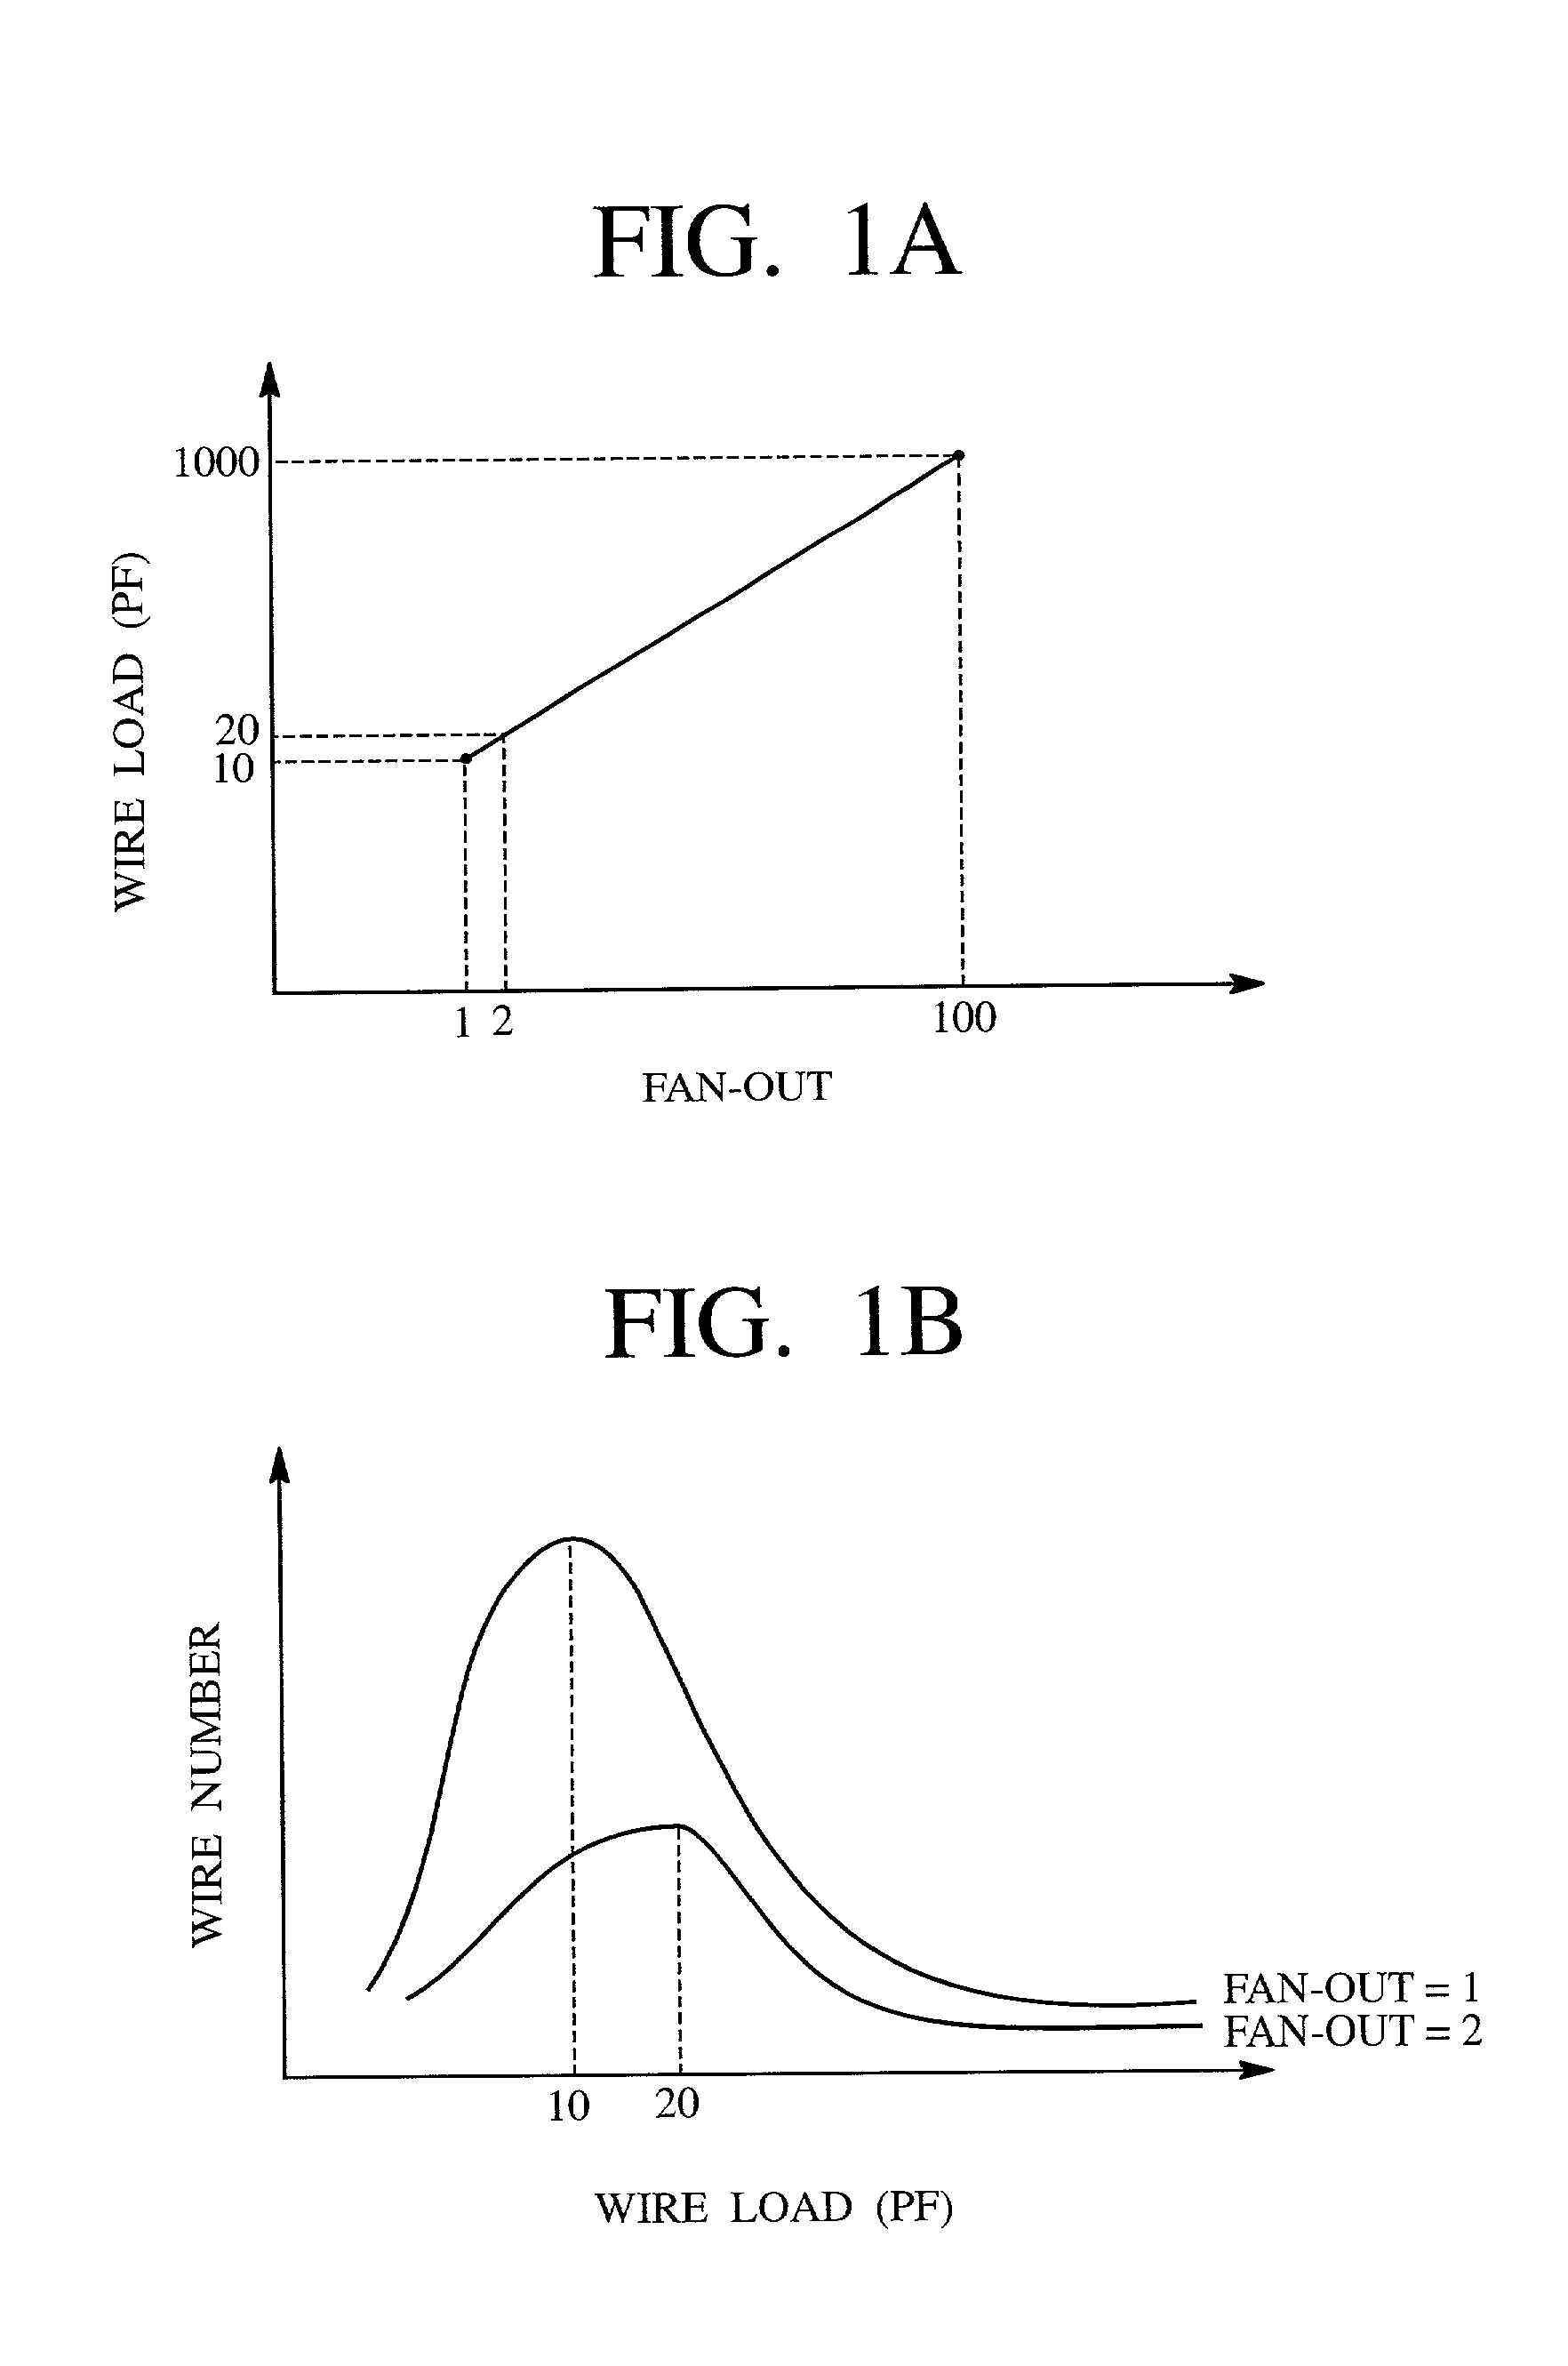 Logical synthesizing apparatus for converting a hardware functional description into gate-level circuit information